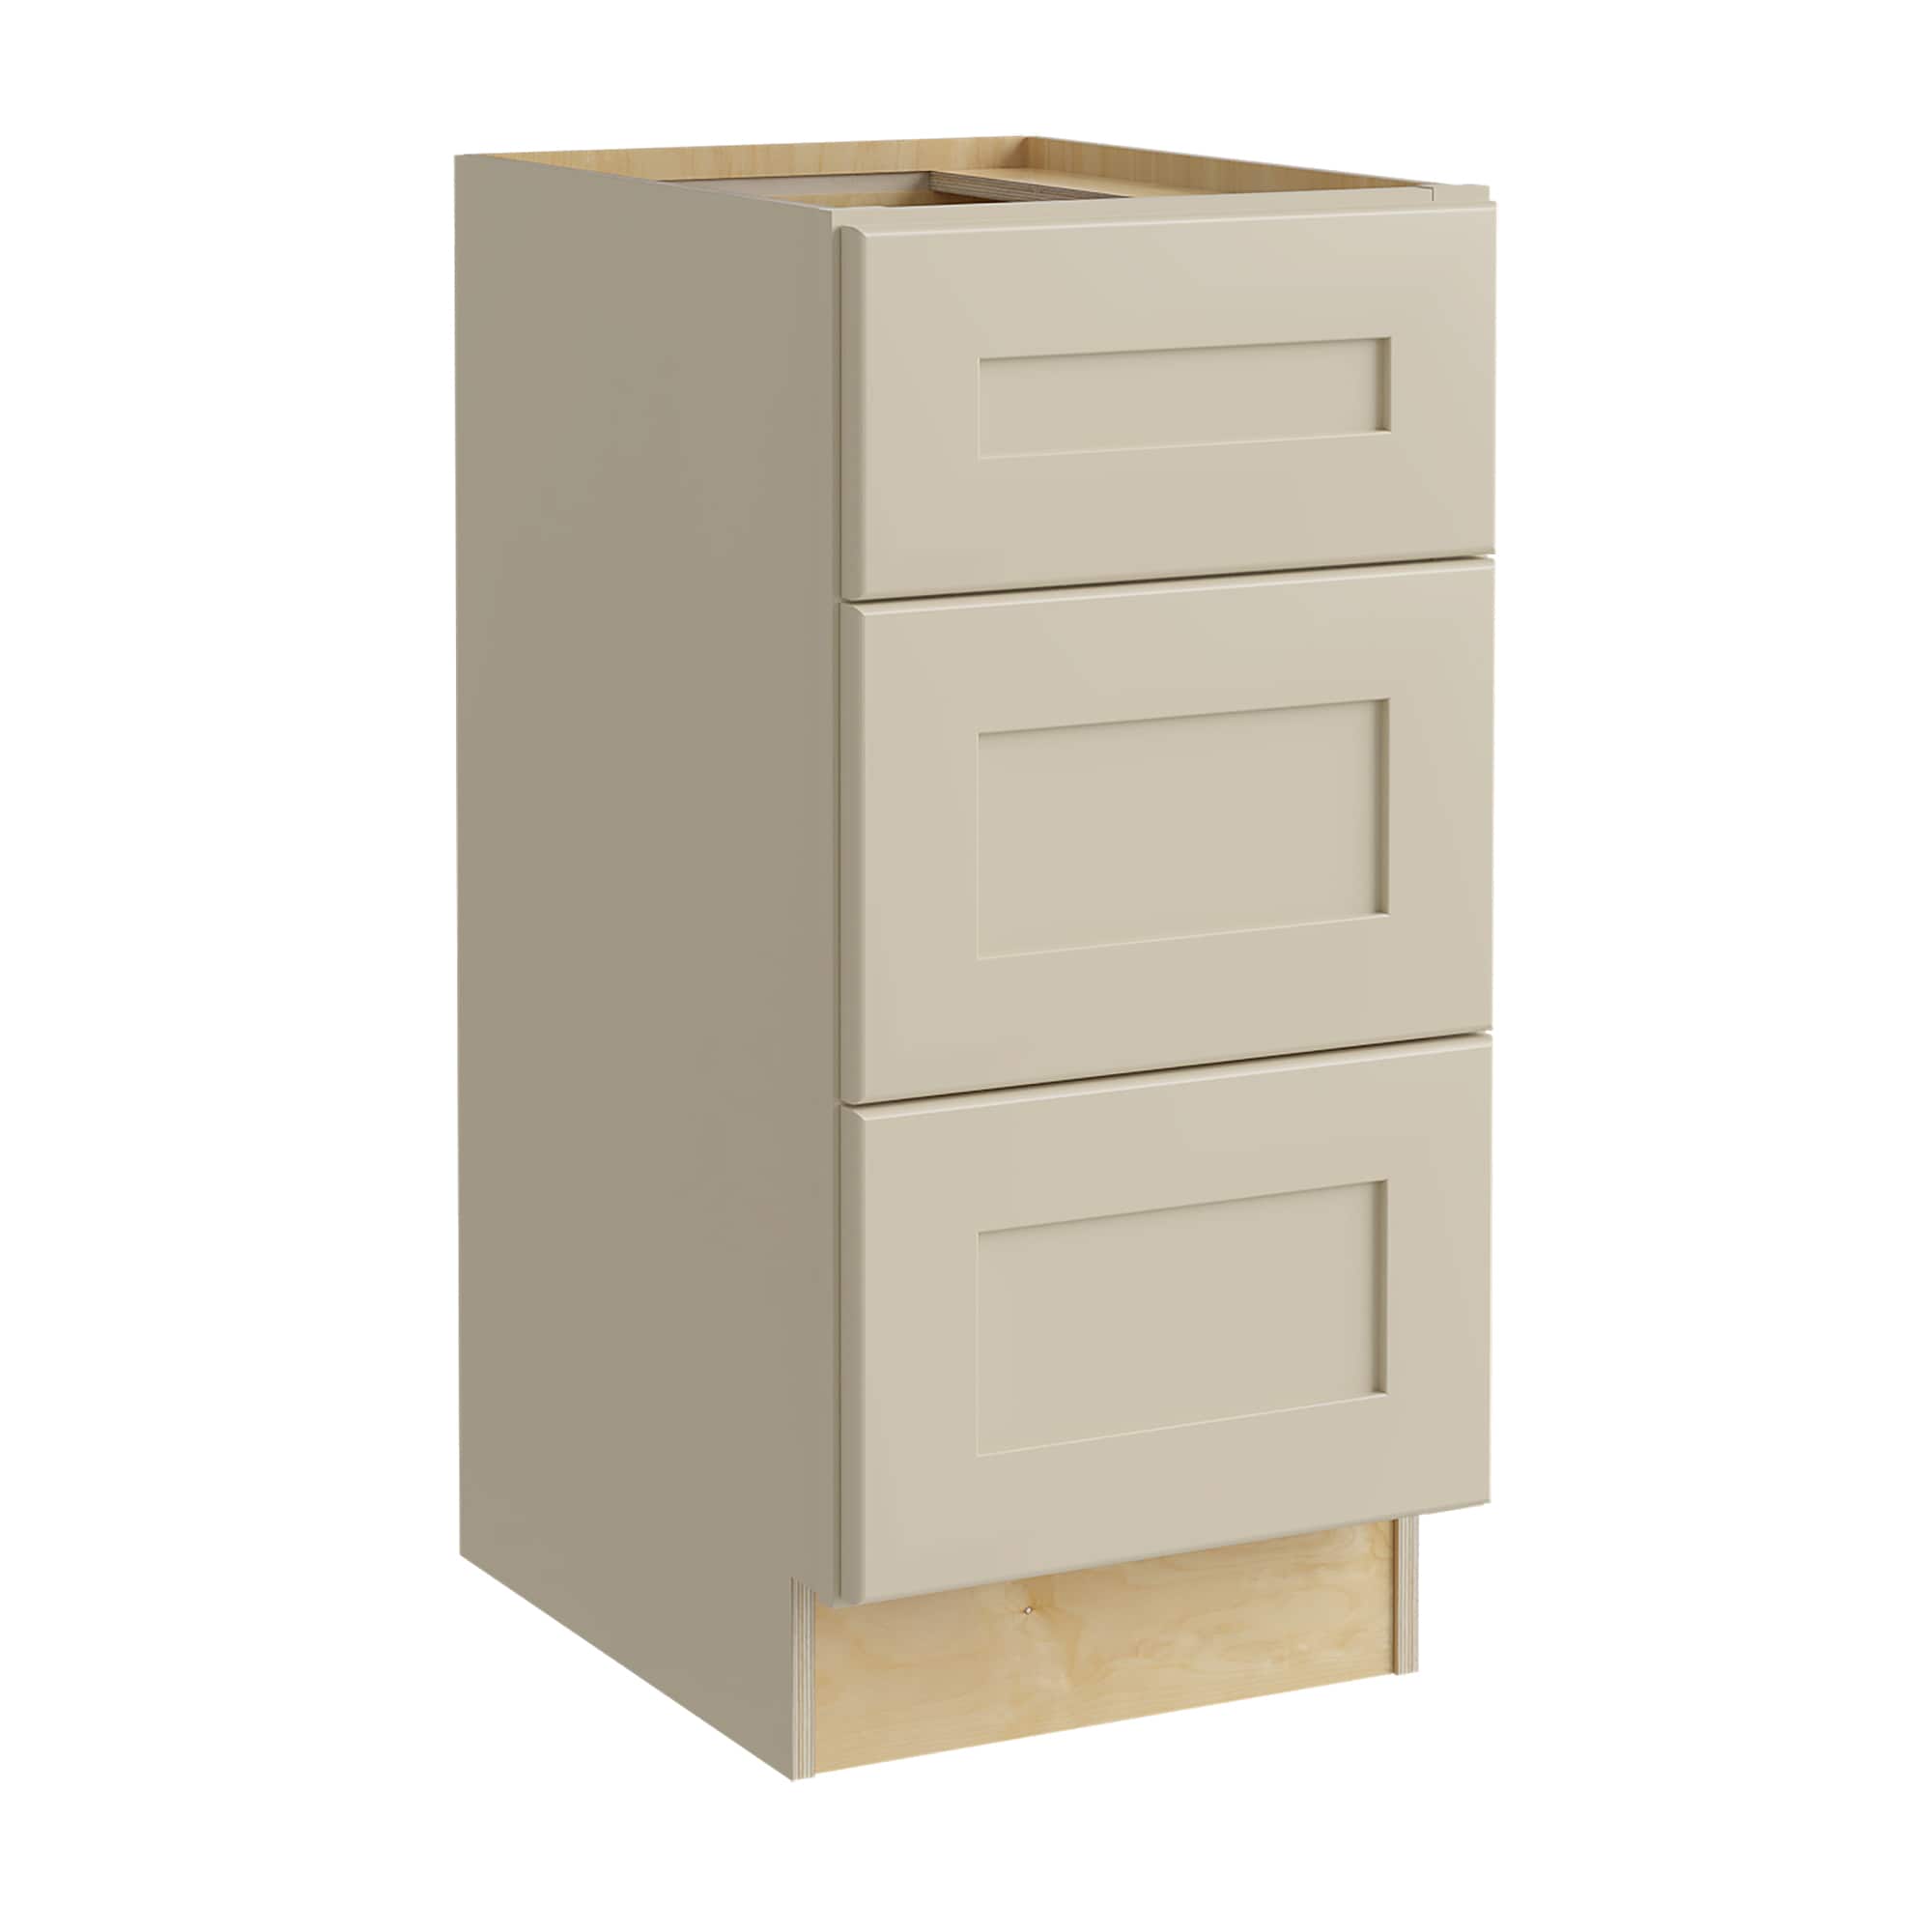 Luxxe Cabinetry 15-in W x 34.5-in H x 24-in D Norfolk Blended Cream Painted Drawer Base Fully Assembled Semi-custom Cabinet in Off-White | BD15-NBC